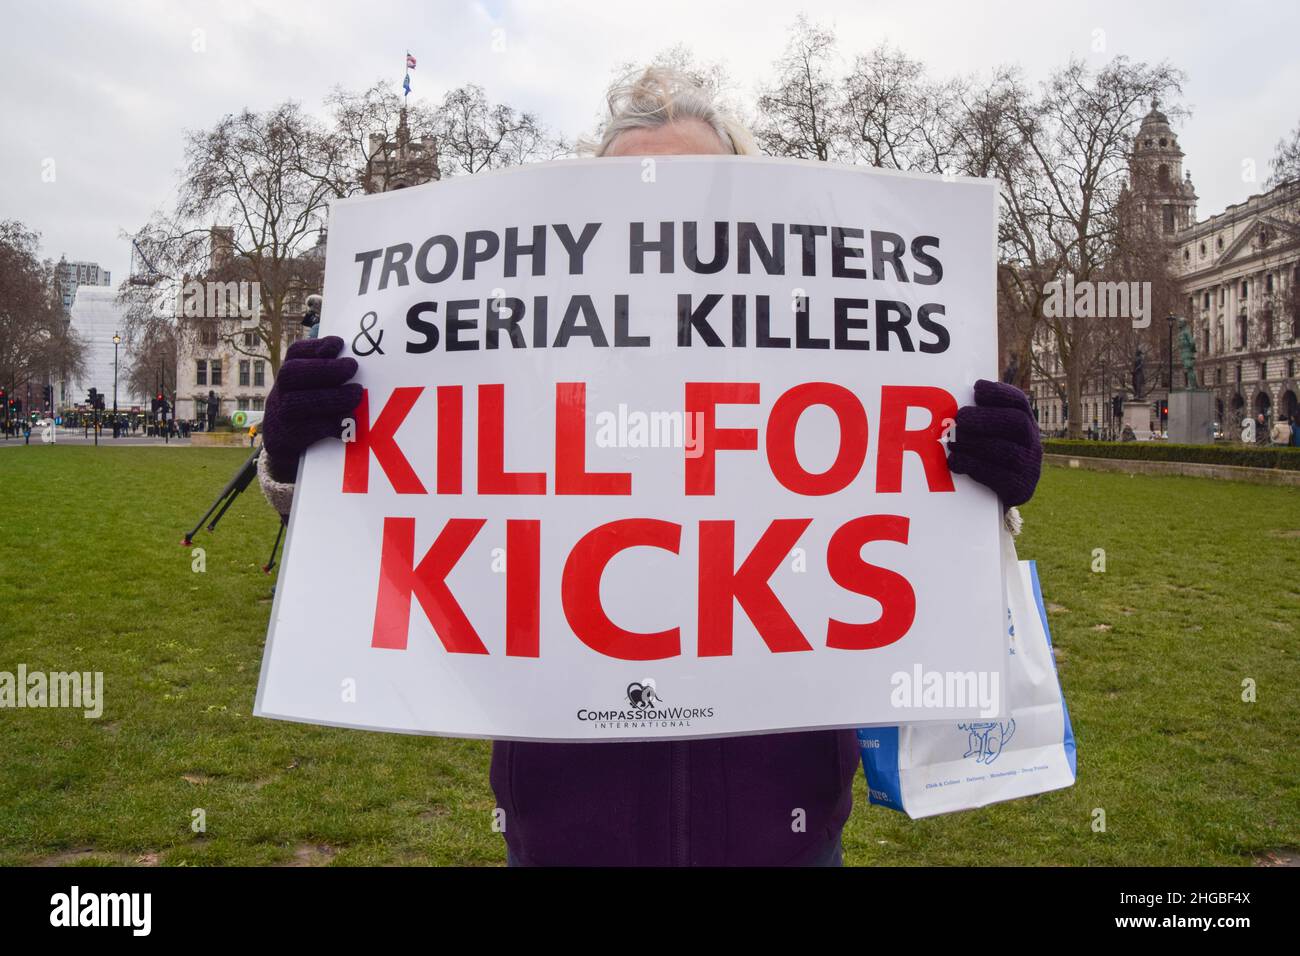 London, UK. 19th Jan, 2022. A protester holds an anti-trophy hunting placard during the Worldwide Rally Against Trophy Hunting.Activists gathered at Parliament Square calling for a ban on trophy hunting and trophy hunting imports. (Photo by Vuk Valcic/SOPA Images/Sipa USA) Credit: Sipa USA/Alamy Live News Stock Photo